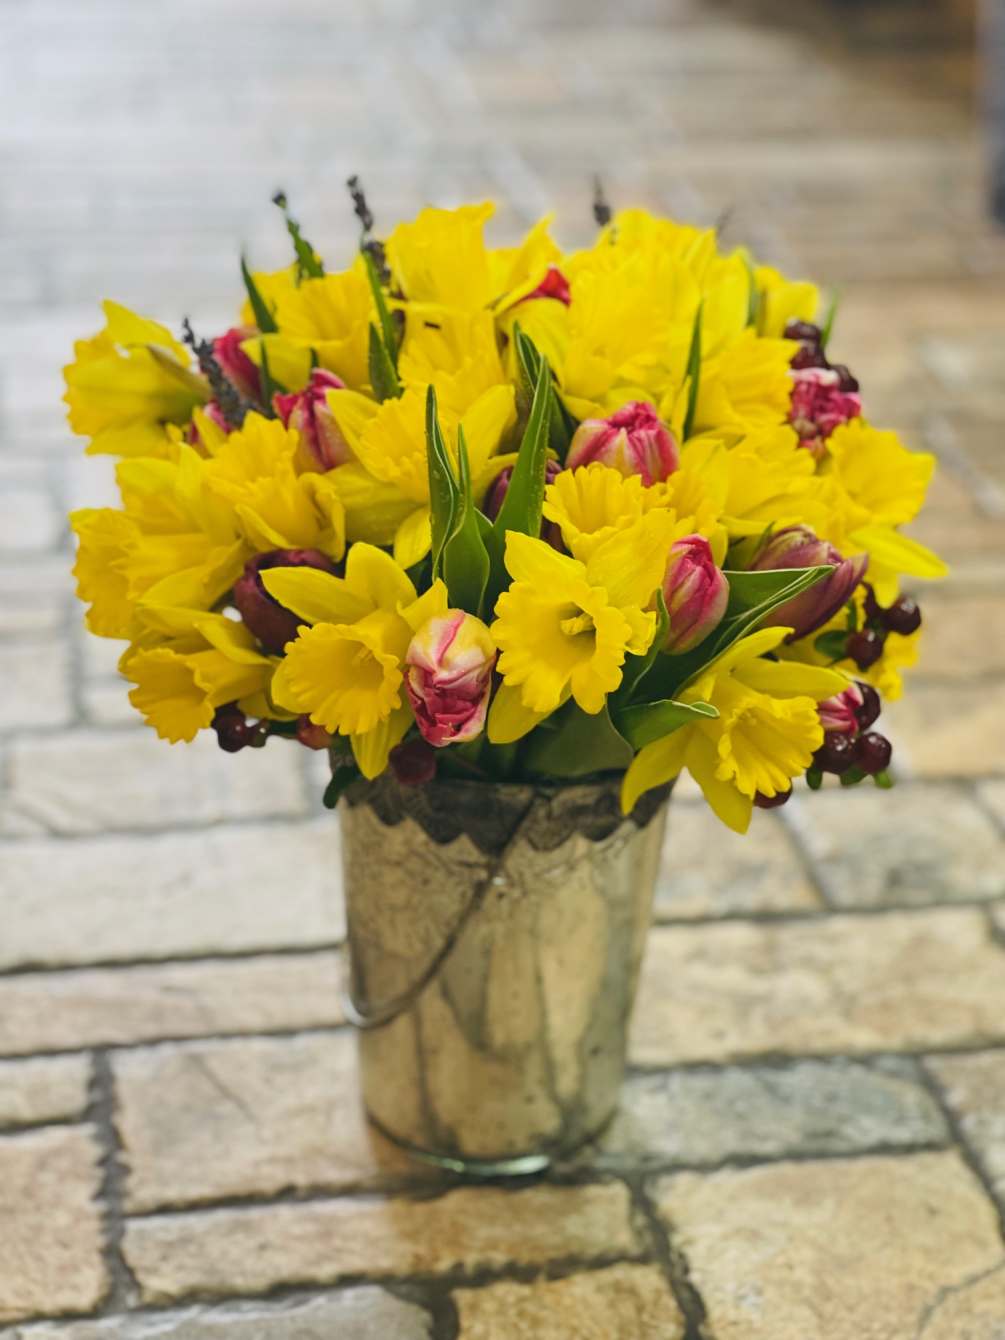 BEAUTIFUL BRIGHT YELLOW DAFFODILS EMPHASIZED WITH CONTRASTING TULIPS AND BRIGHT, ROUND BERRIES.